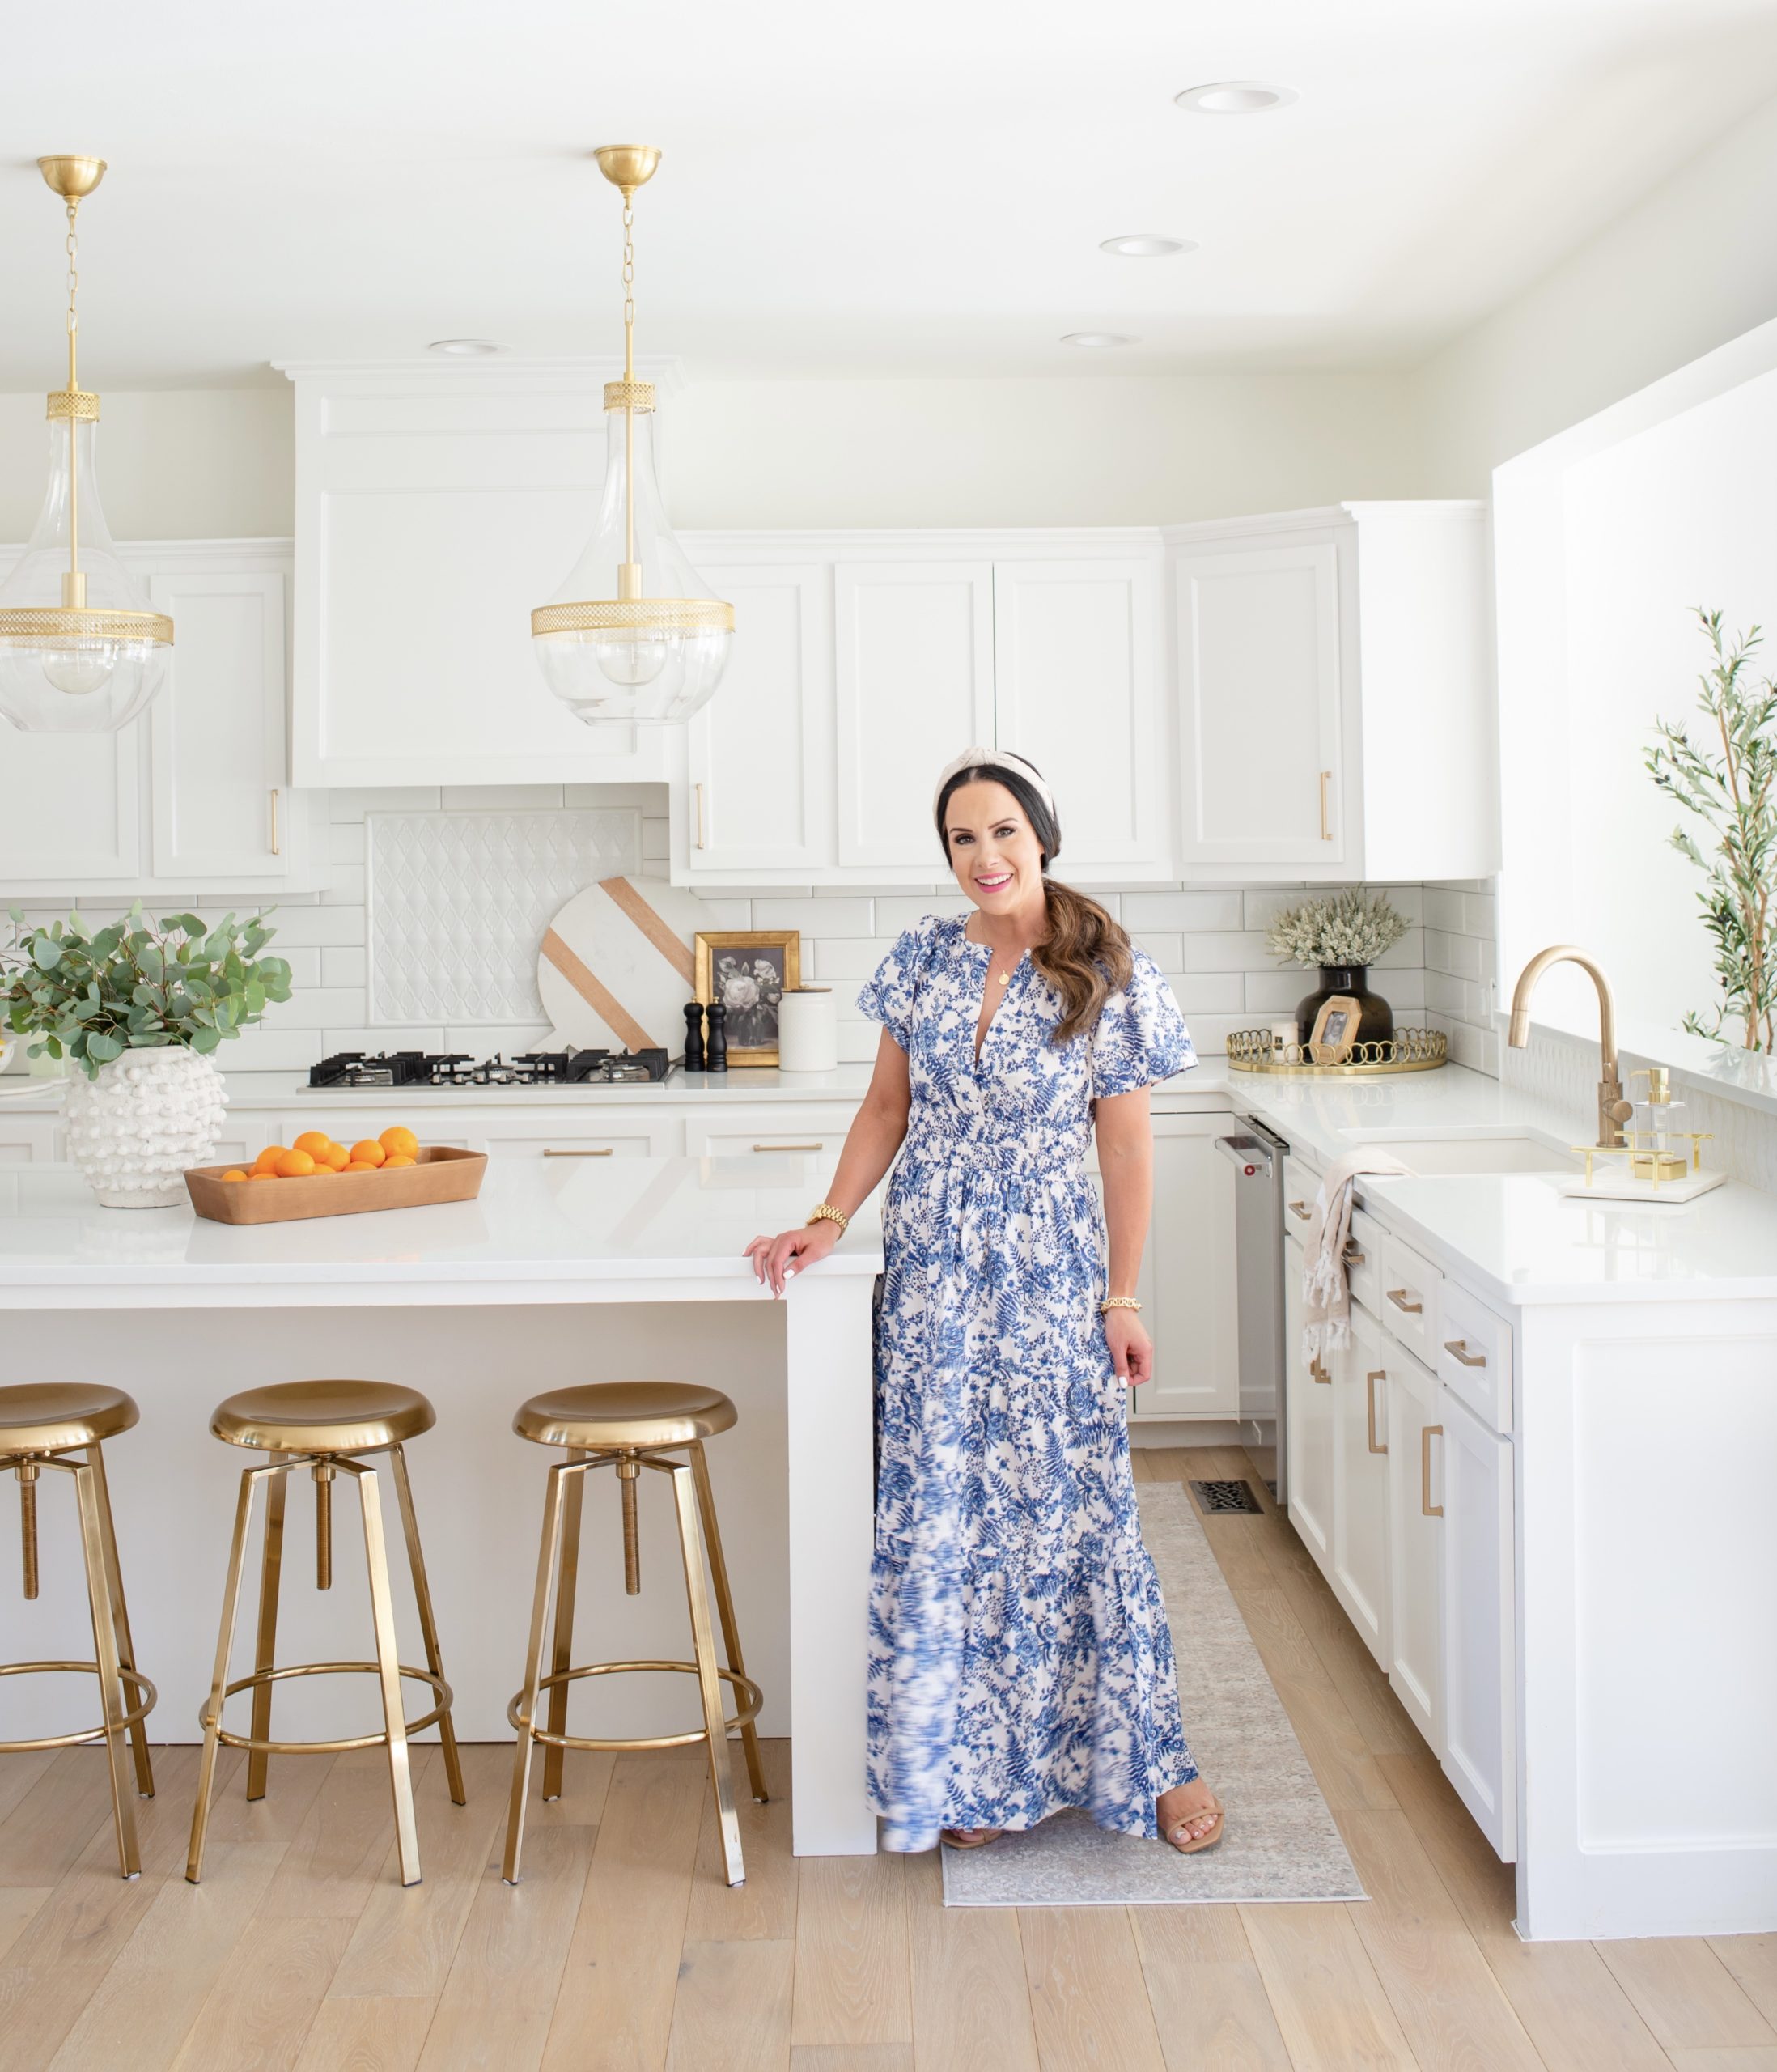 lindsay's white & gold kitchen remodel reveal! - the double take girls